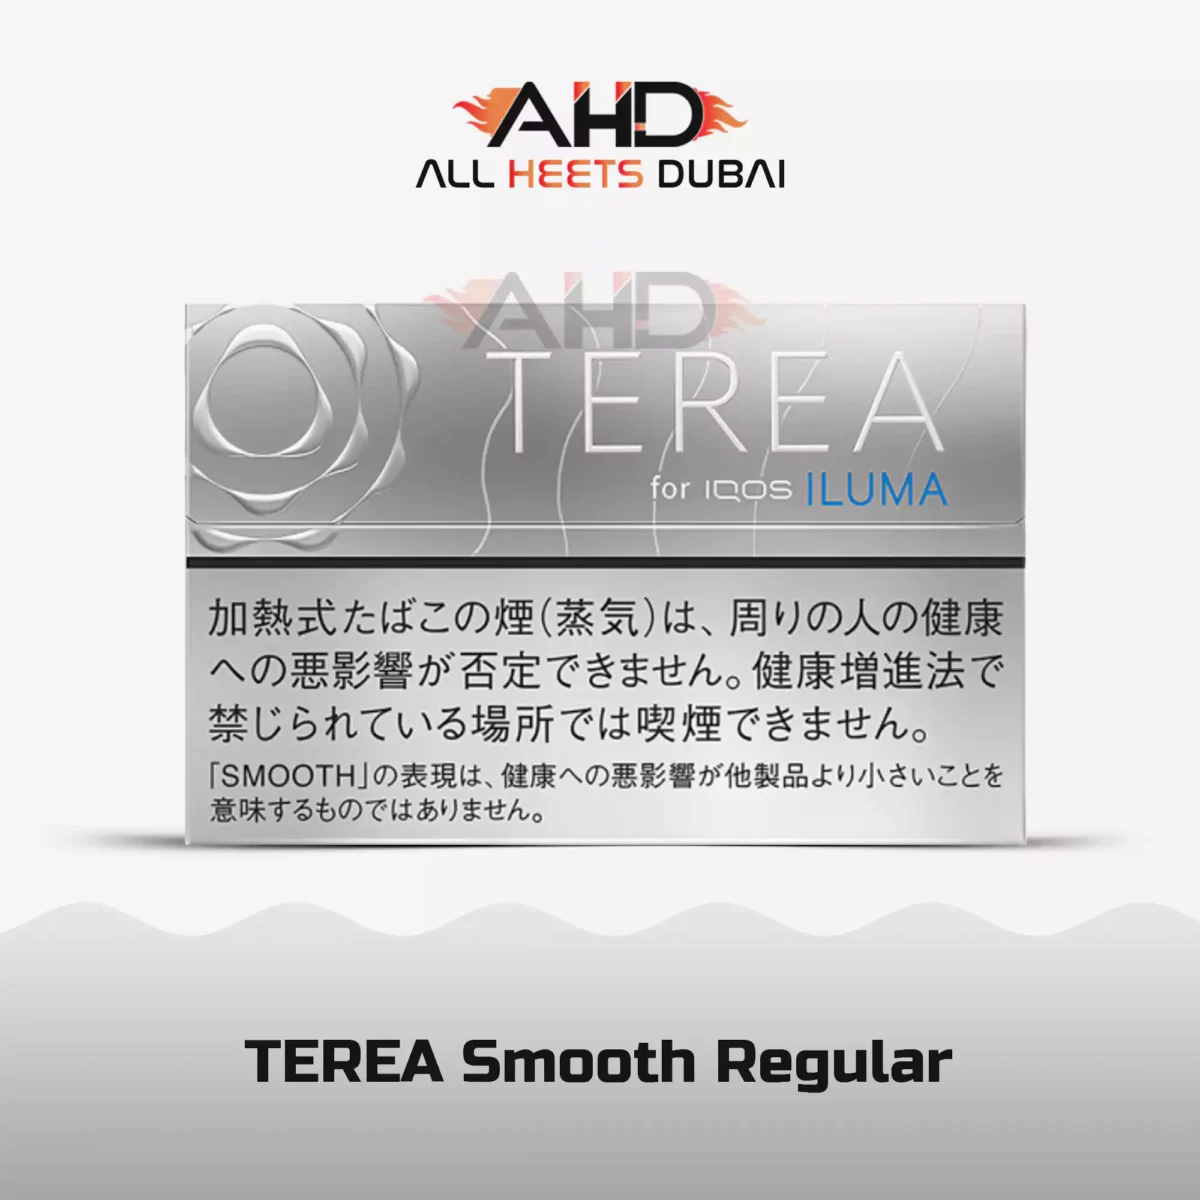 iqos terea smooth-regular for iluma-japan. In the vibrant cities of Dubai, Ajman, and Sharjah, delight in the convenience of 1-hour delivery. And that's not all – our magic extends across the UAE, embracing Abu Dhabi, Dubai, Sharjah, Ajman, Umm Al Quwain, Ras Al Khaimah, and Fujairah with a swift 24-hour embrace.